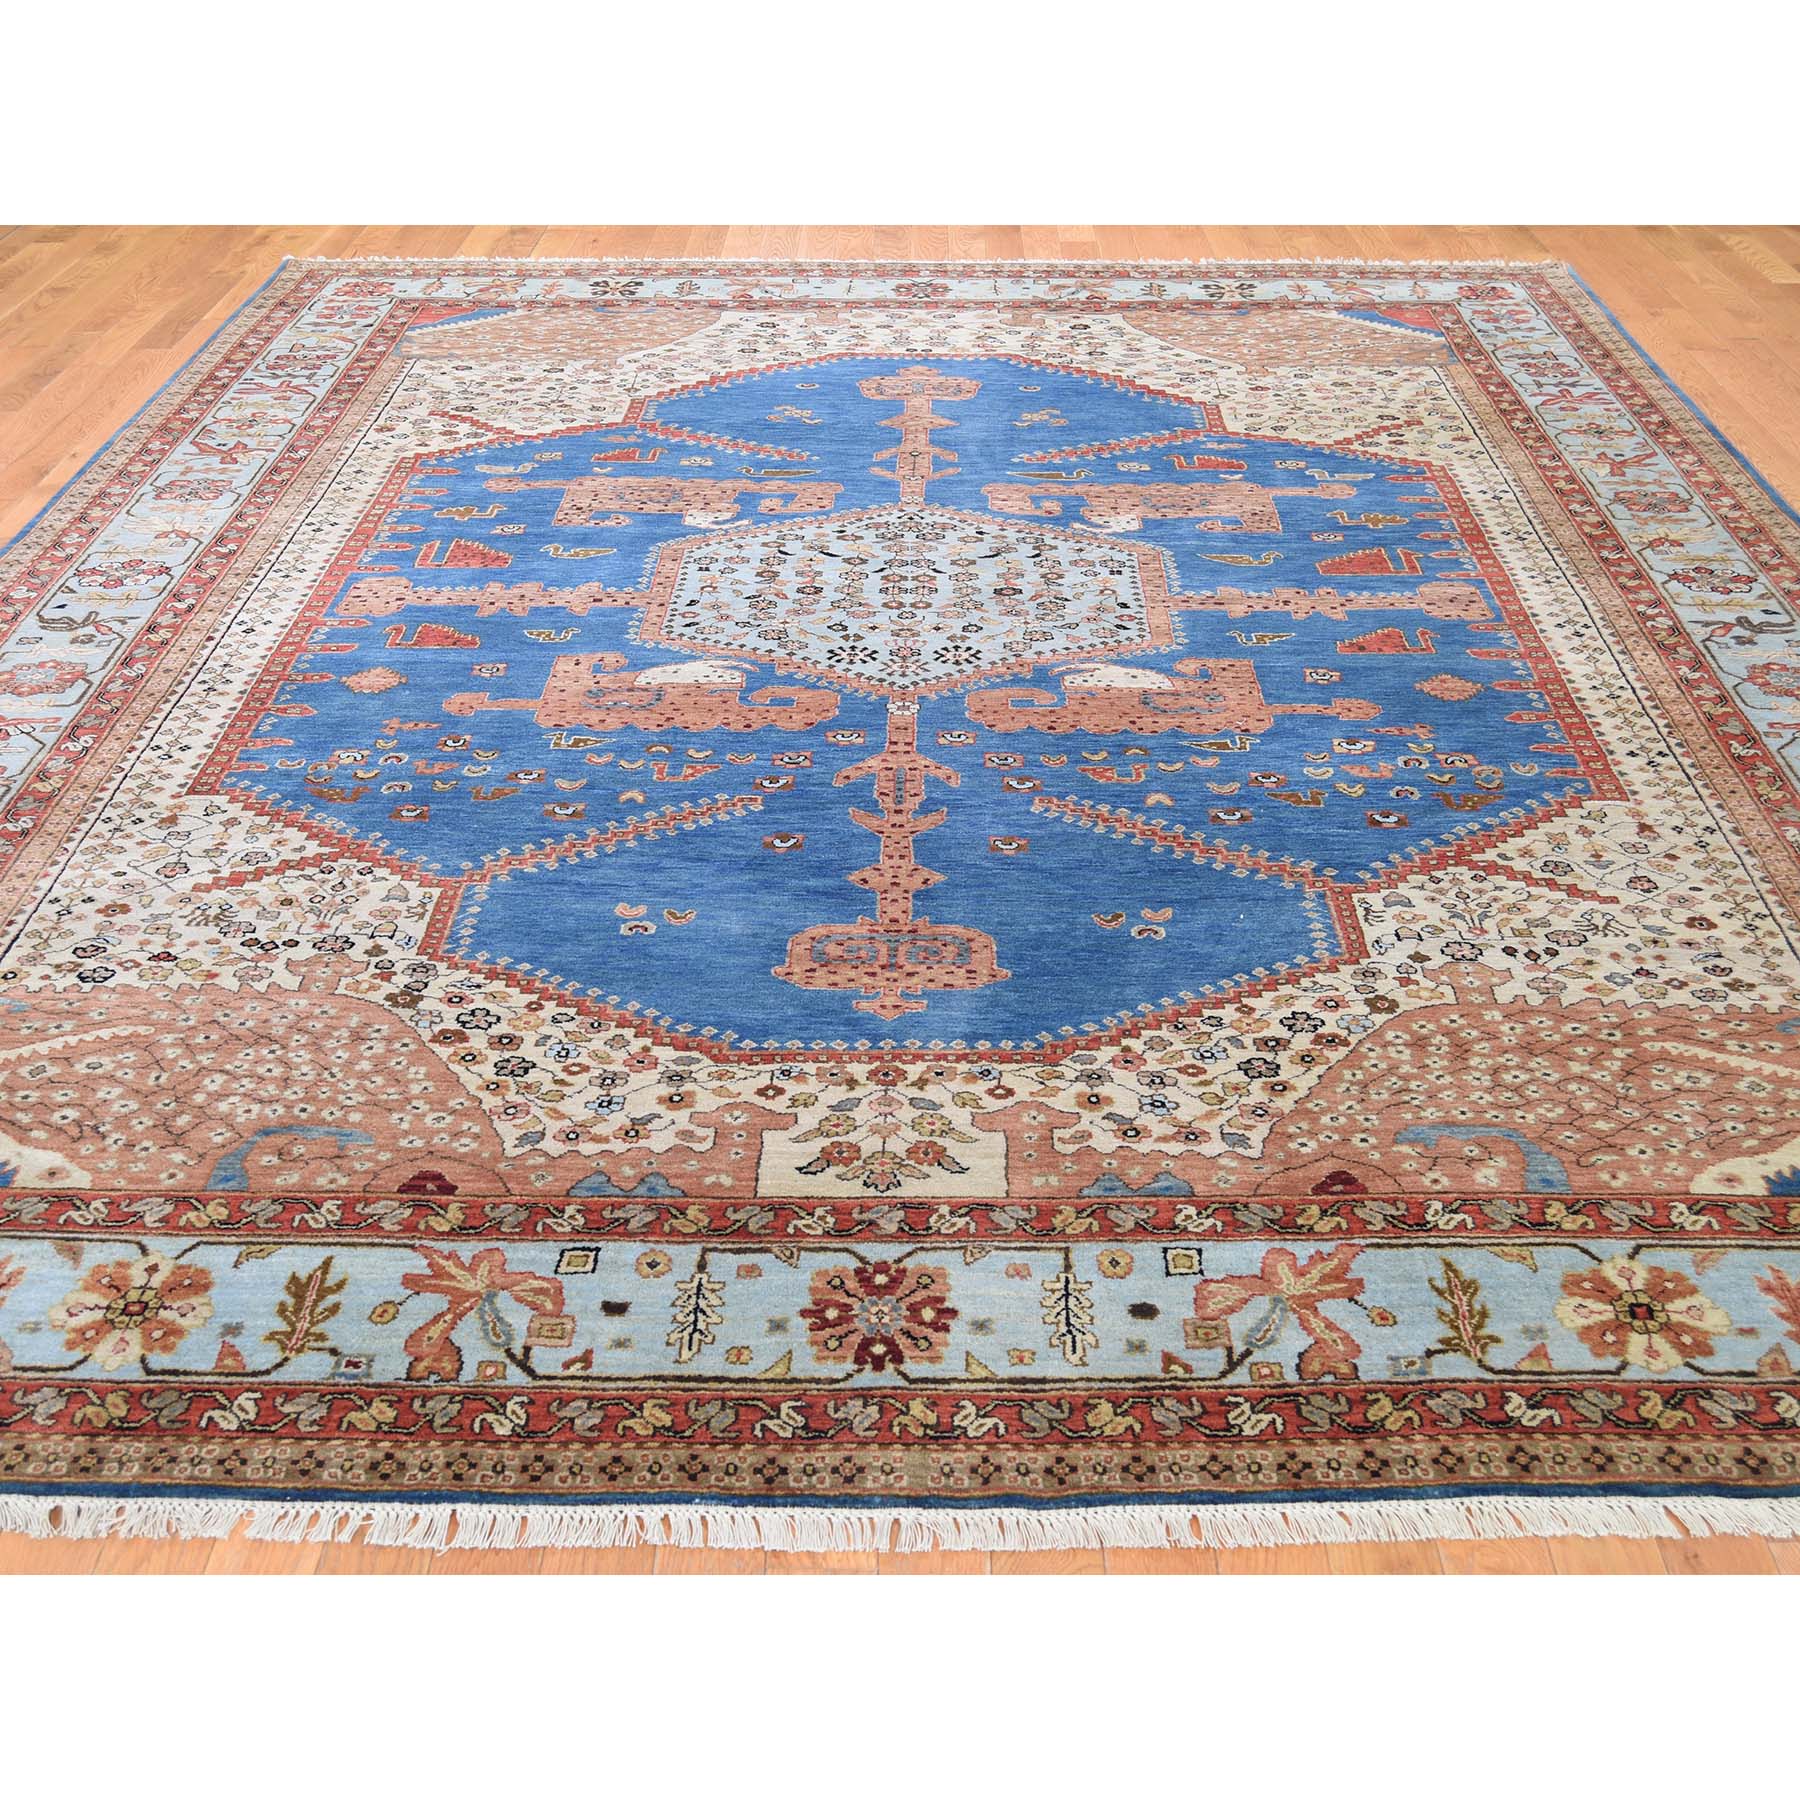 9-2 x11-7  Pure Wool Vegetable Dyes Bakshaish Hand-Knotted Oriental Rug 